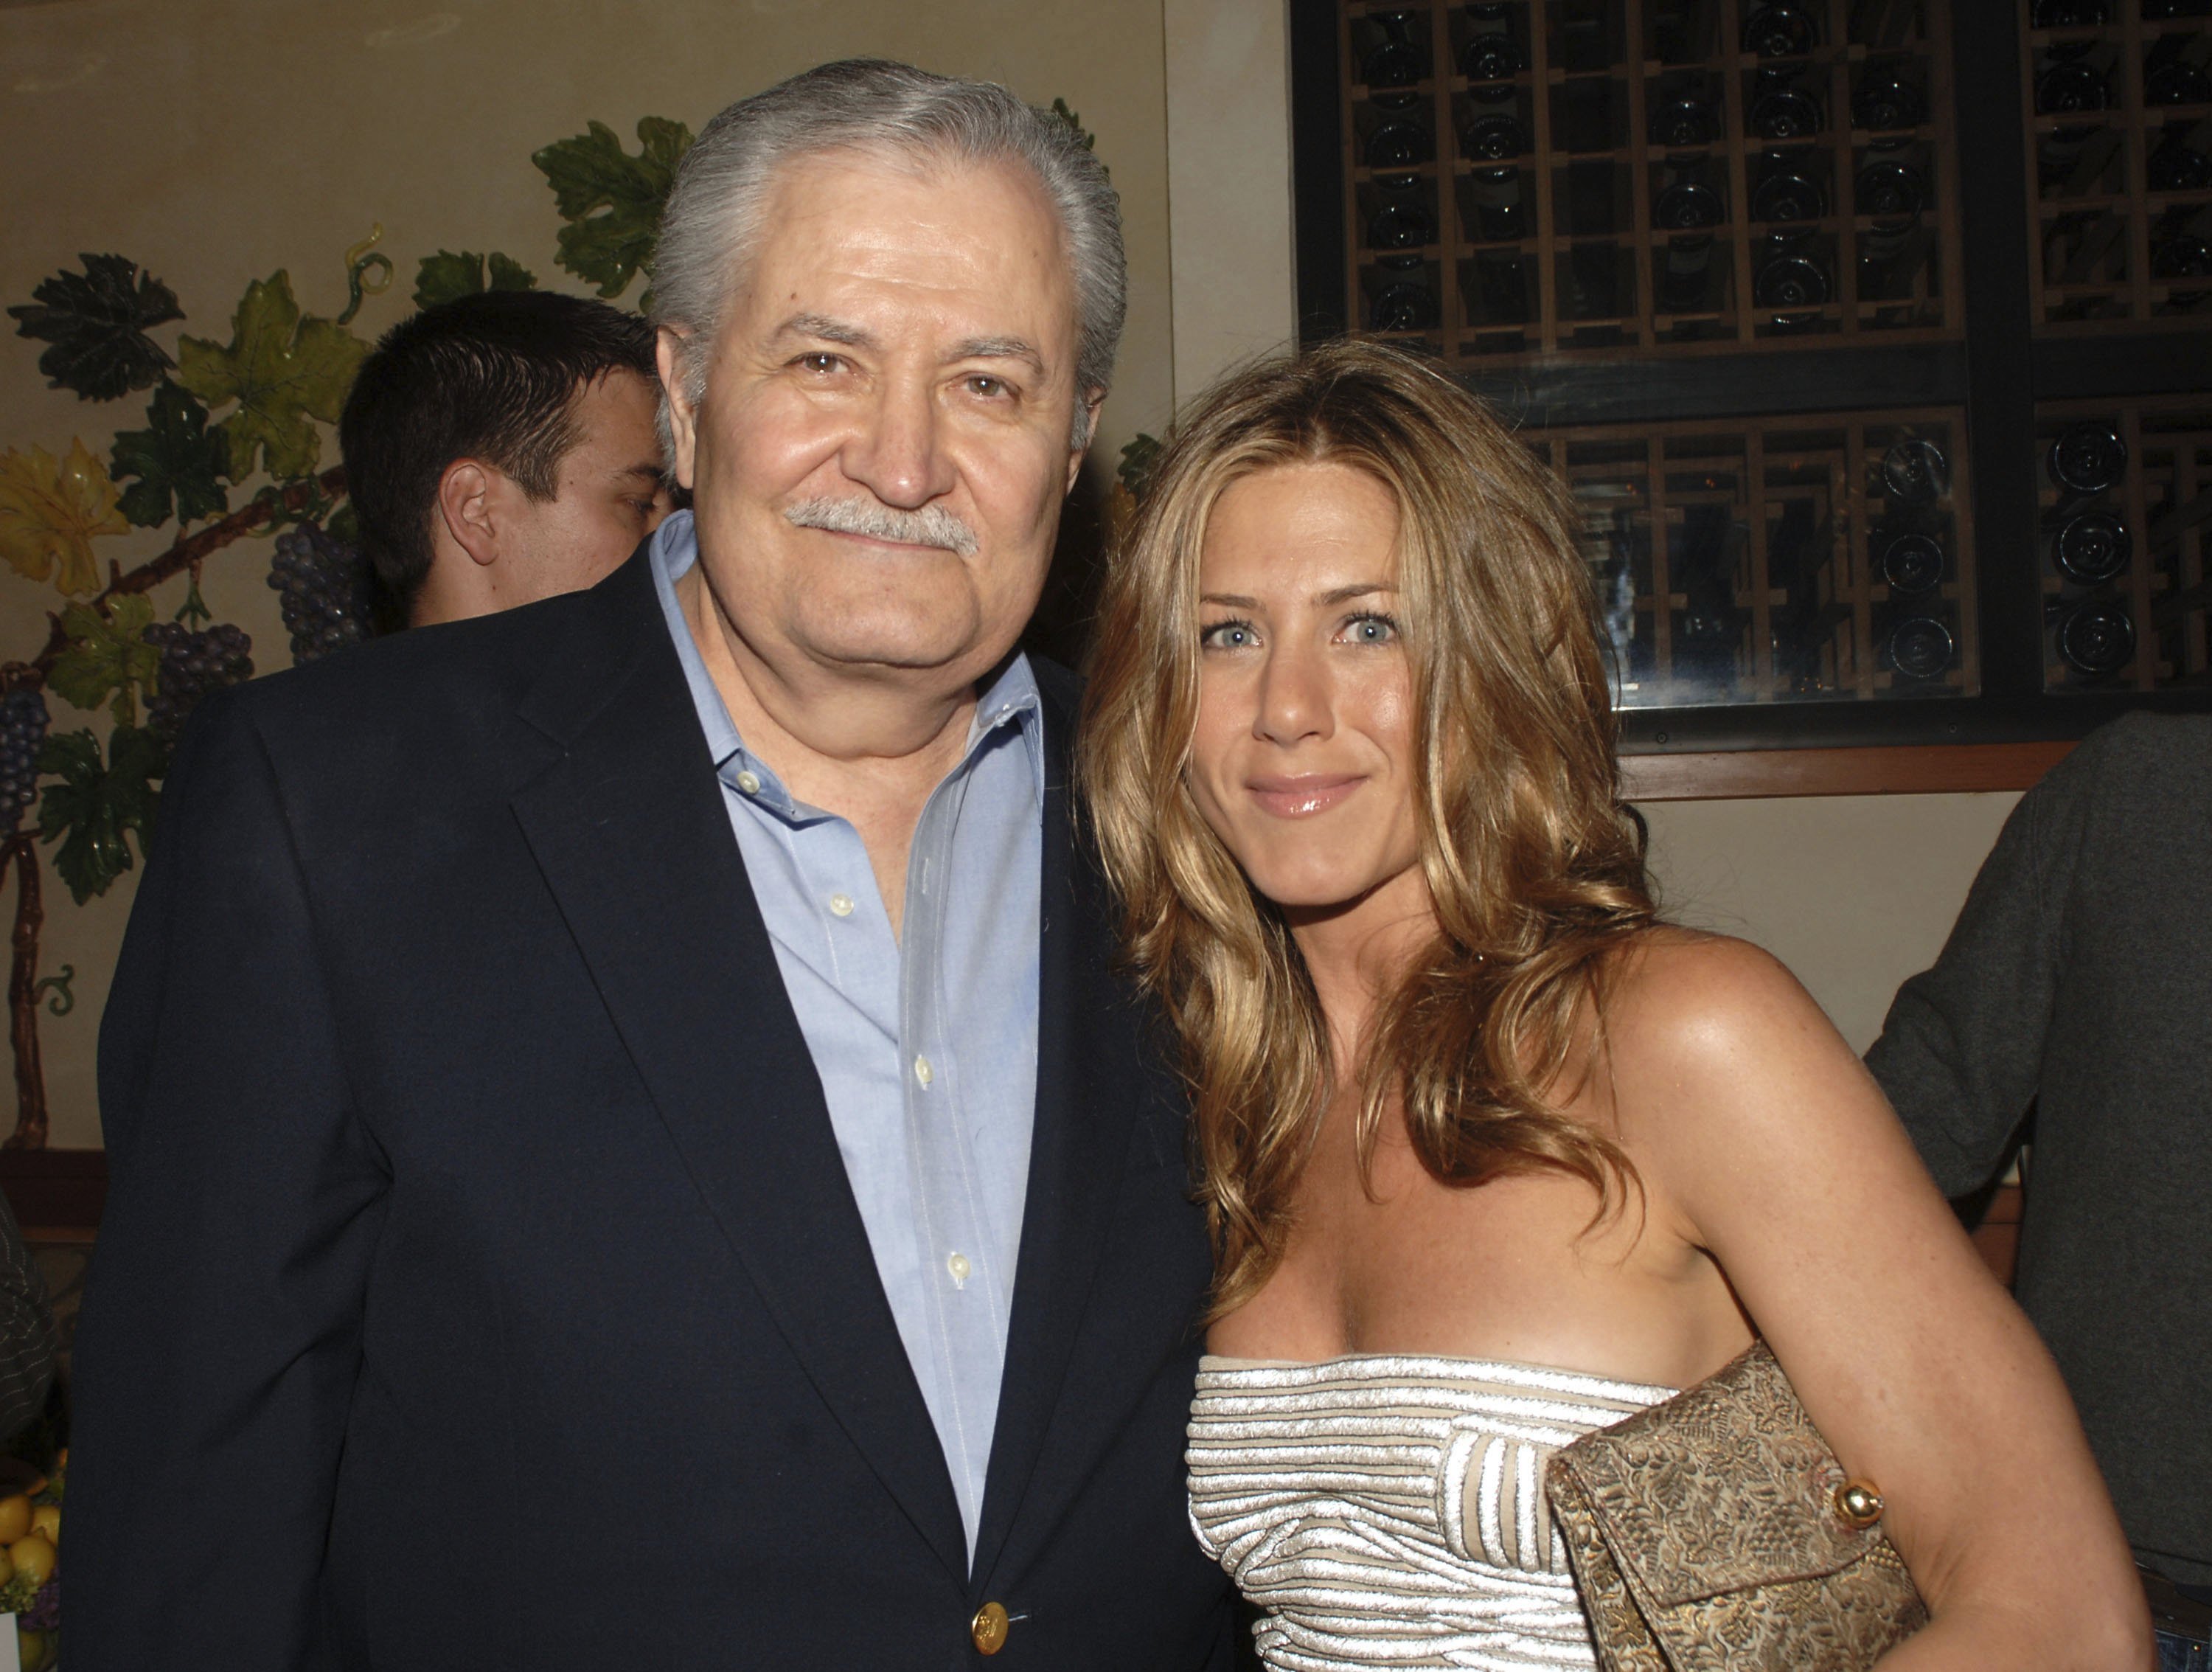 John Aniston and Jennifer Aniston attend the after party for 'The Break-Up'